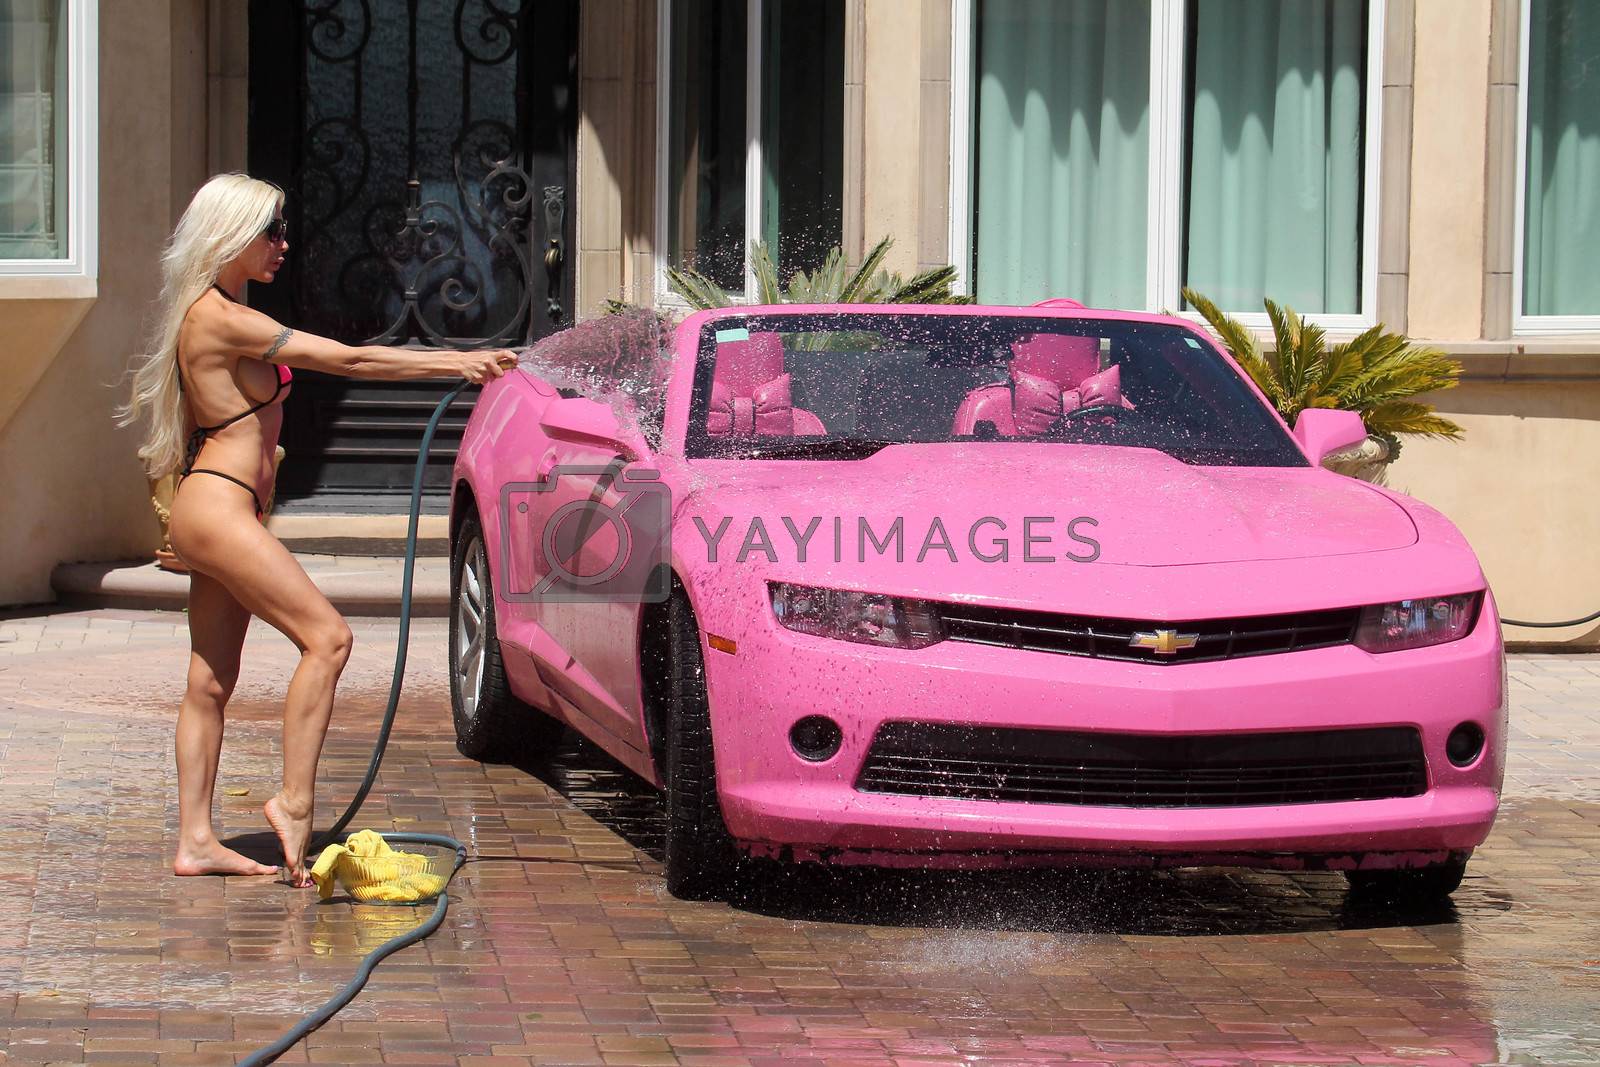 Royalty free image of Frenchy Morgan the "Celebrity Big Brother" Star is spotted on a hot day wearing a tiny pink bikini while washing her pink car in Malibu, CA 05-22-17/ImageCollect by ImageCollect